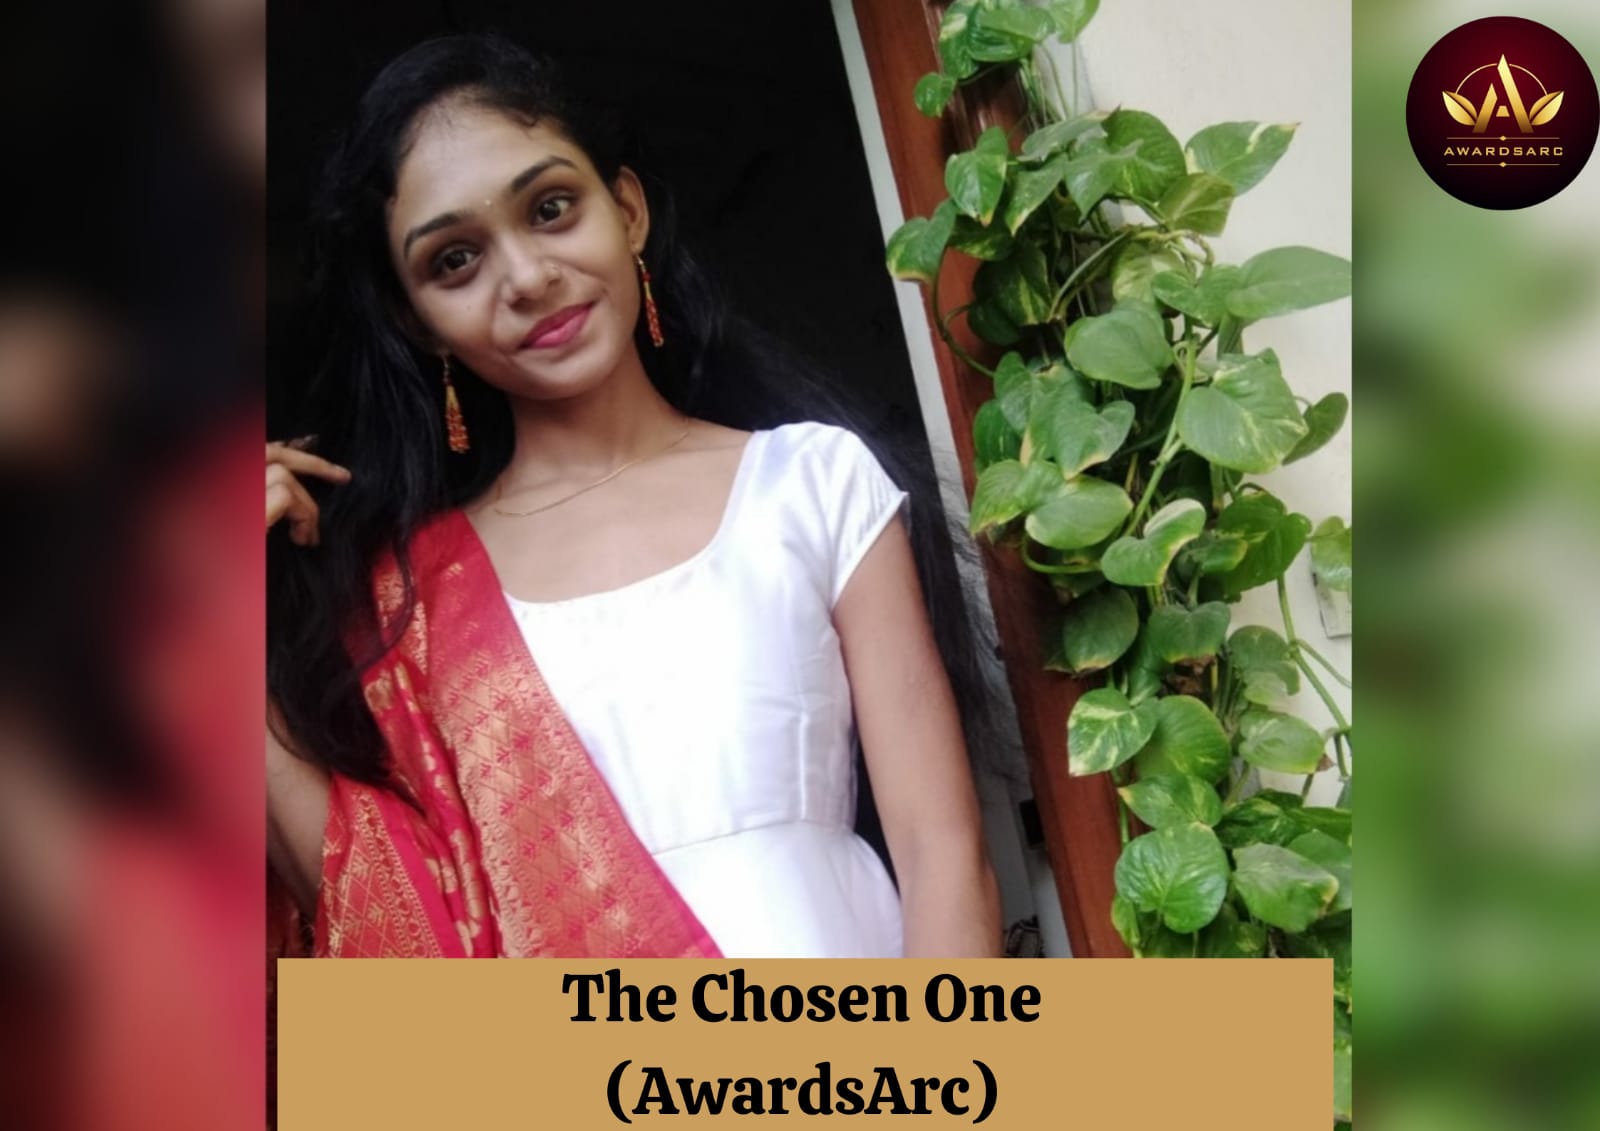 Surekha Wankhede is one of THE CHOSEN ONES by AwardsArc